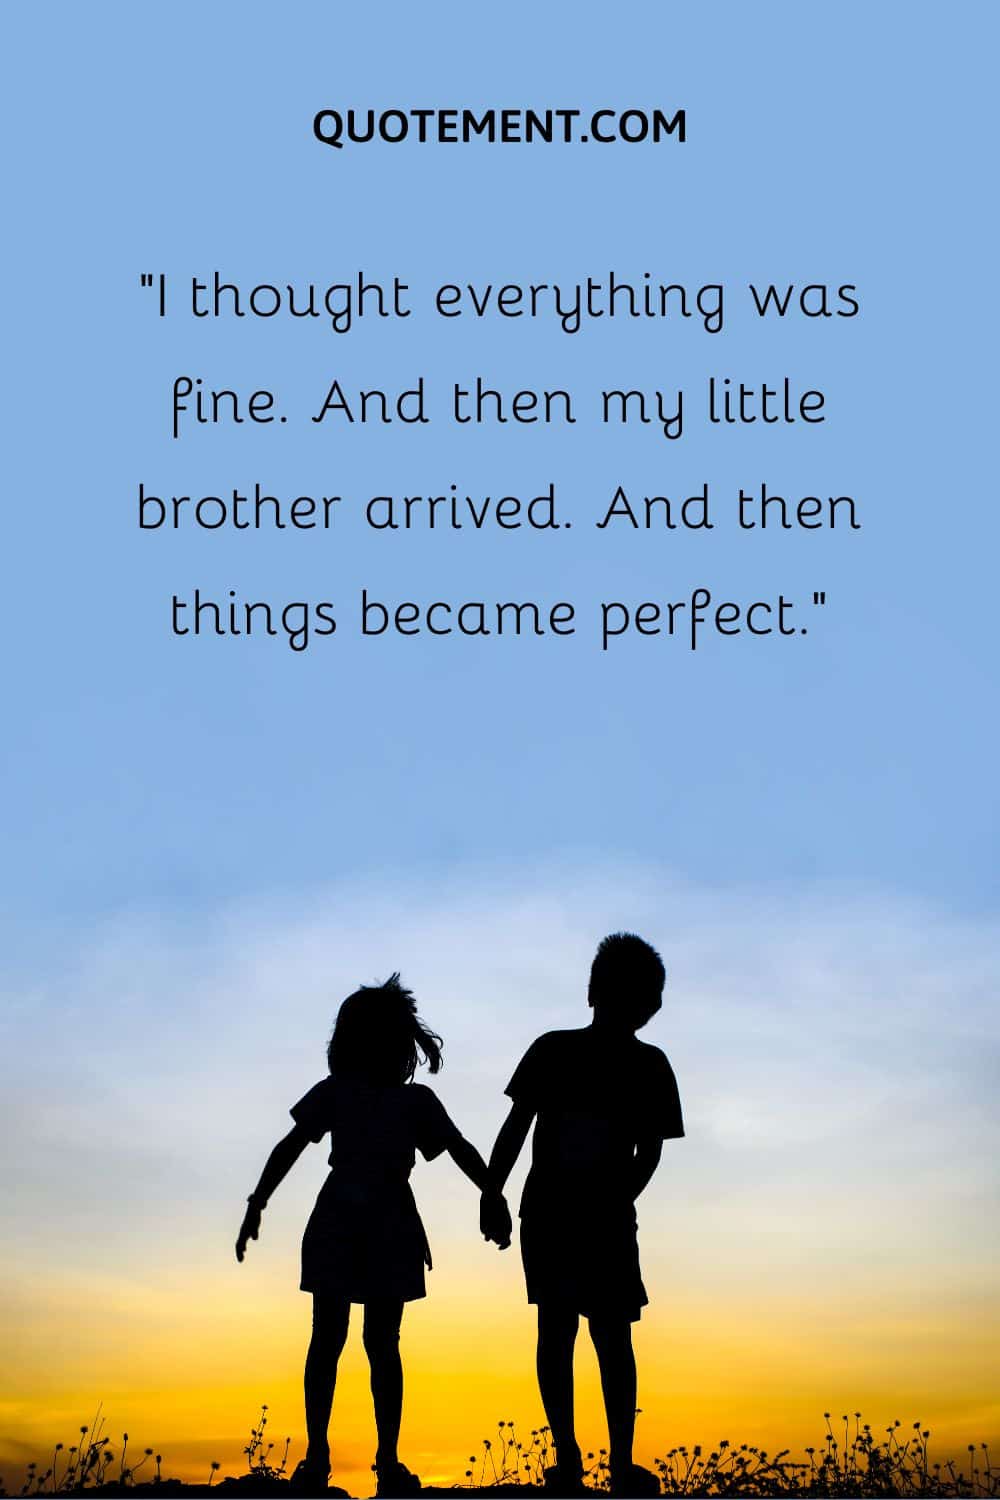 “I thought everything was fine. And then my little brother arrived. And then things became perfect.”